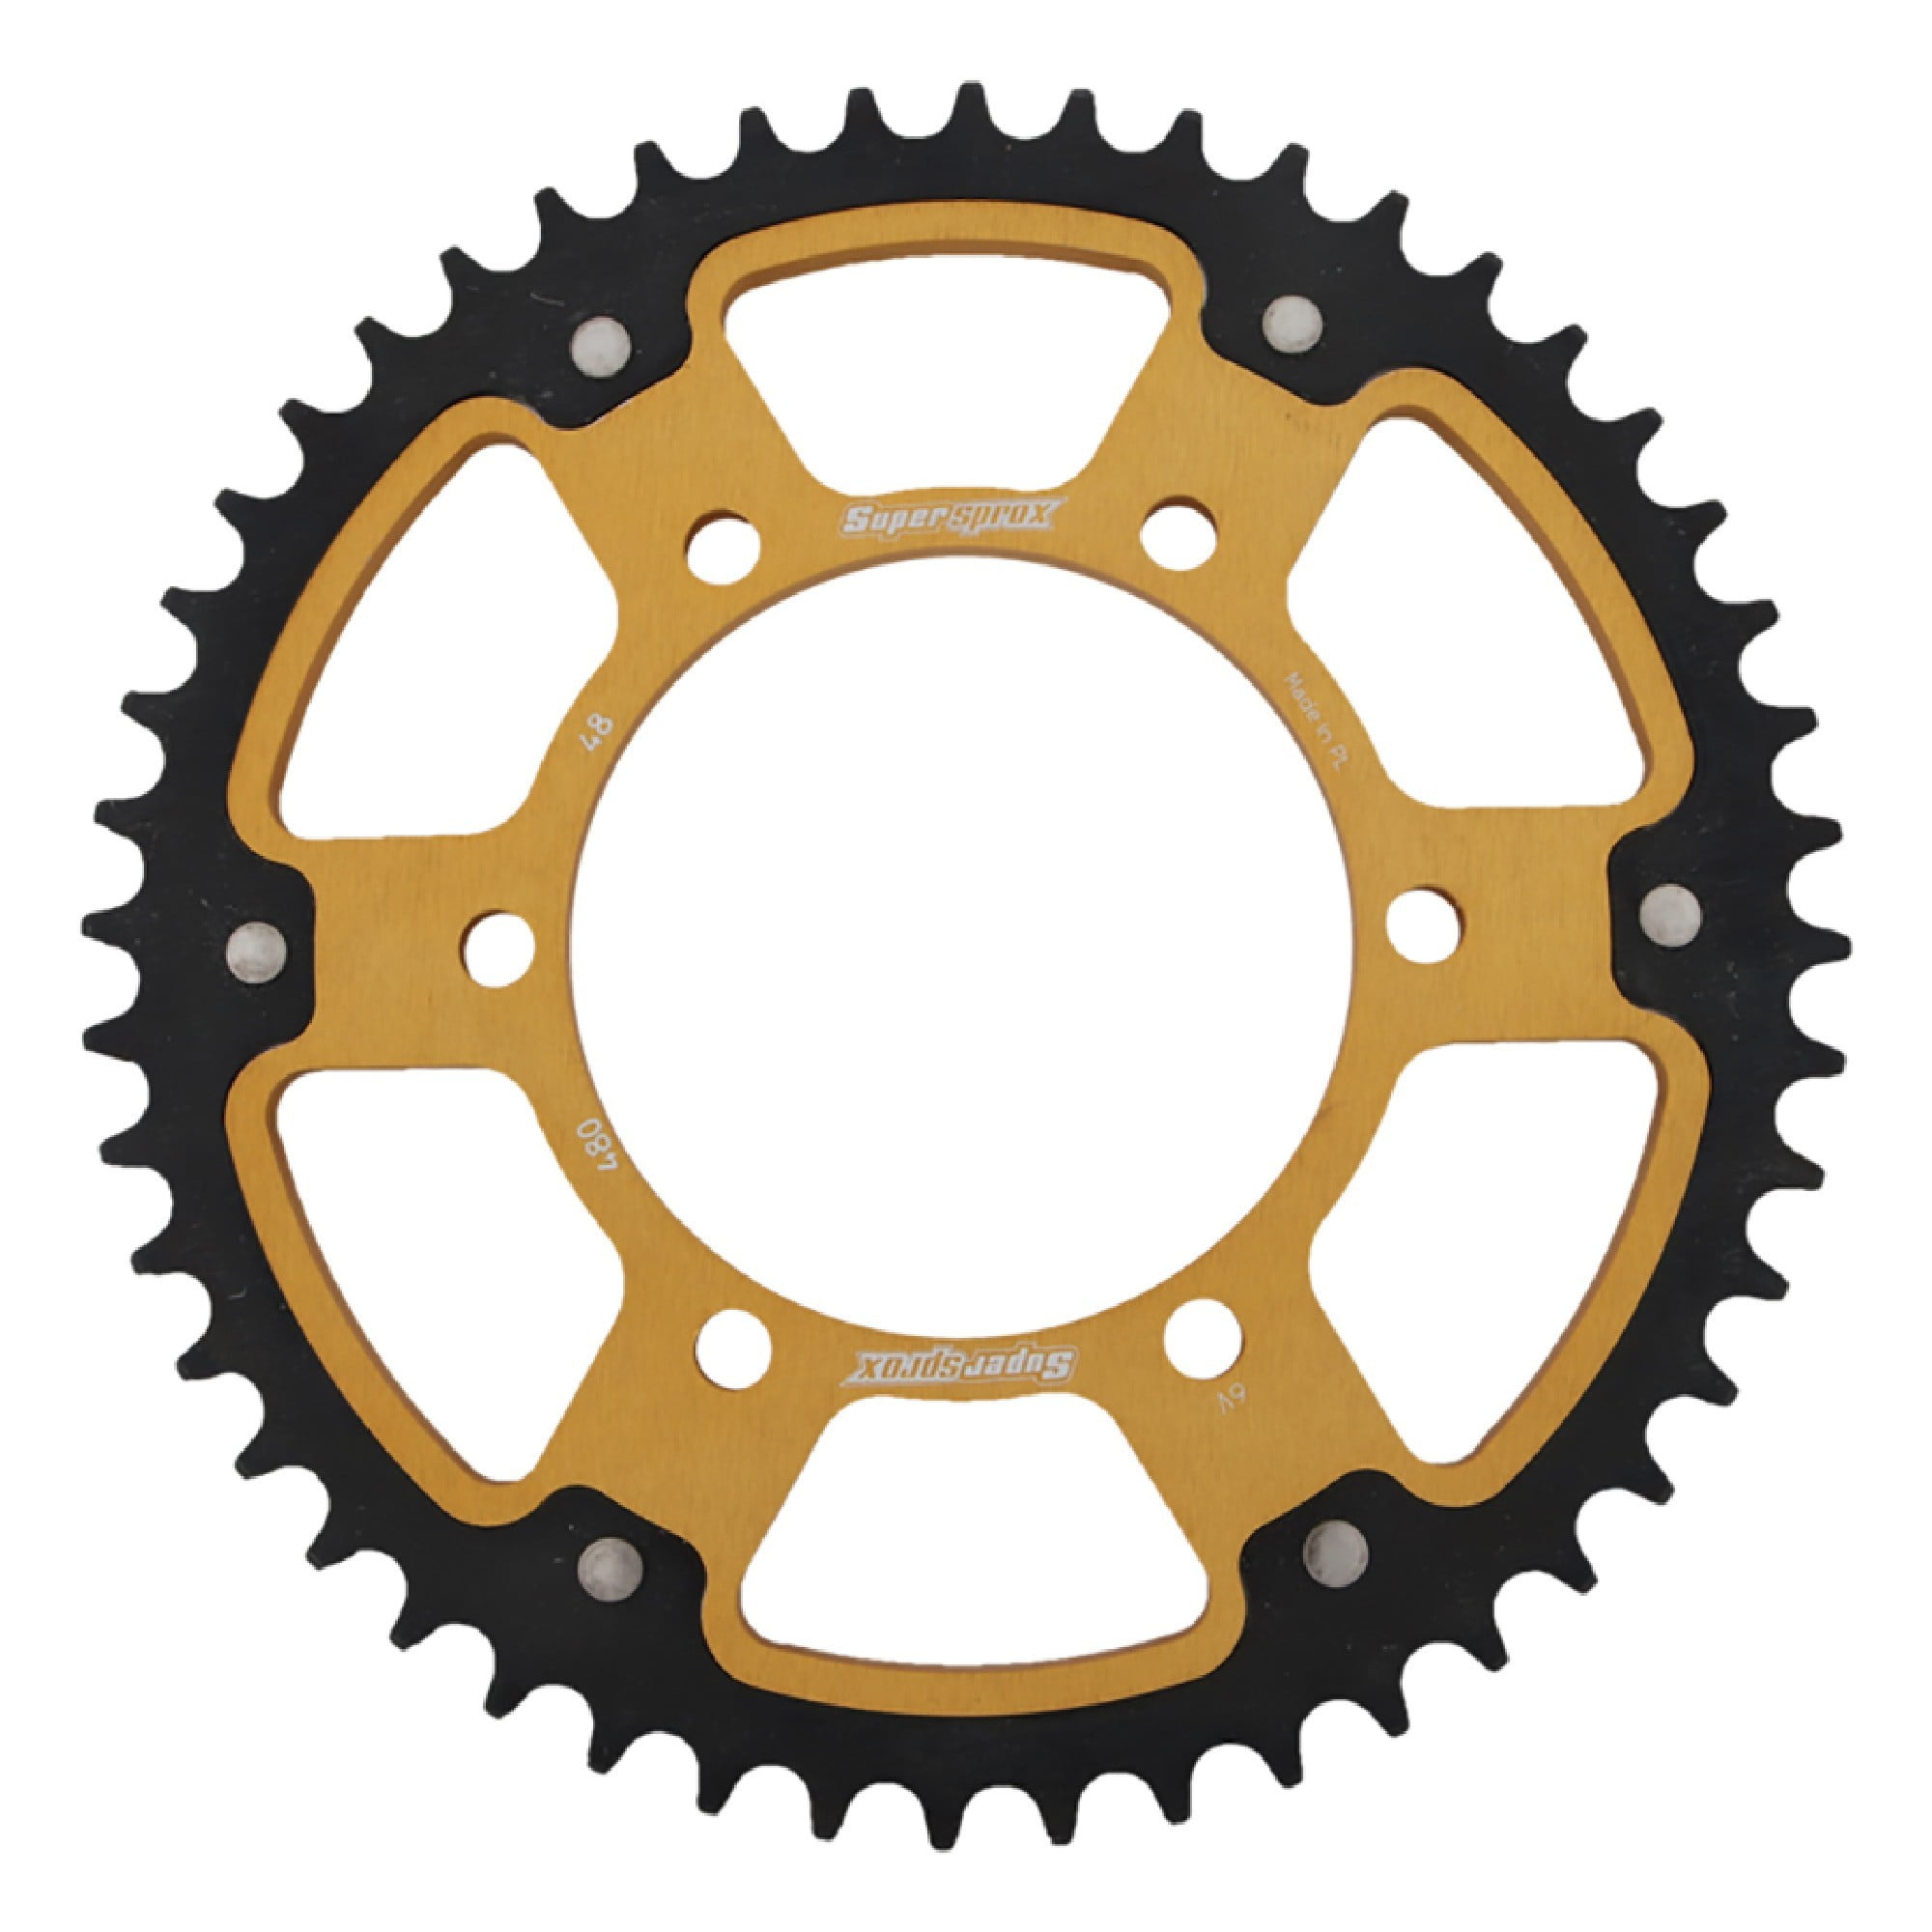 New Supersprox 48T Rst-1332-48-Gld Chain Size 525 Gold Stealth Sprocket 